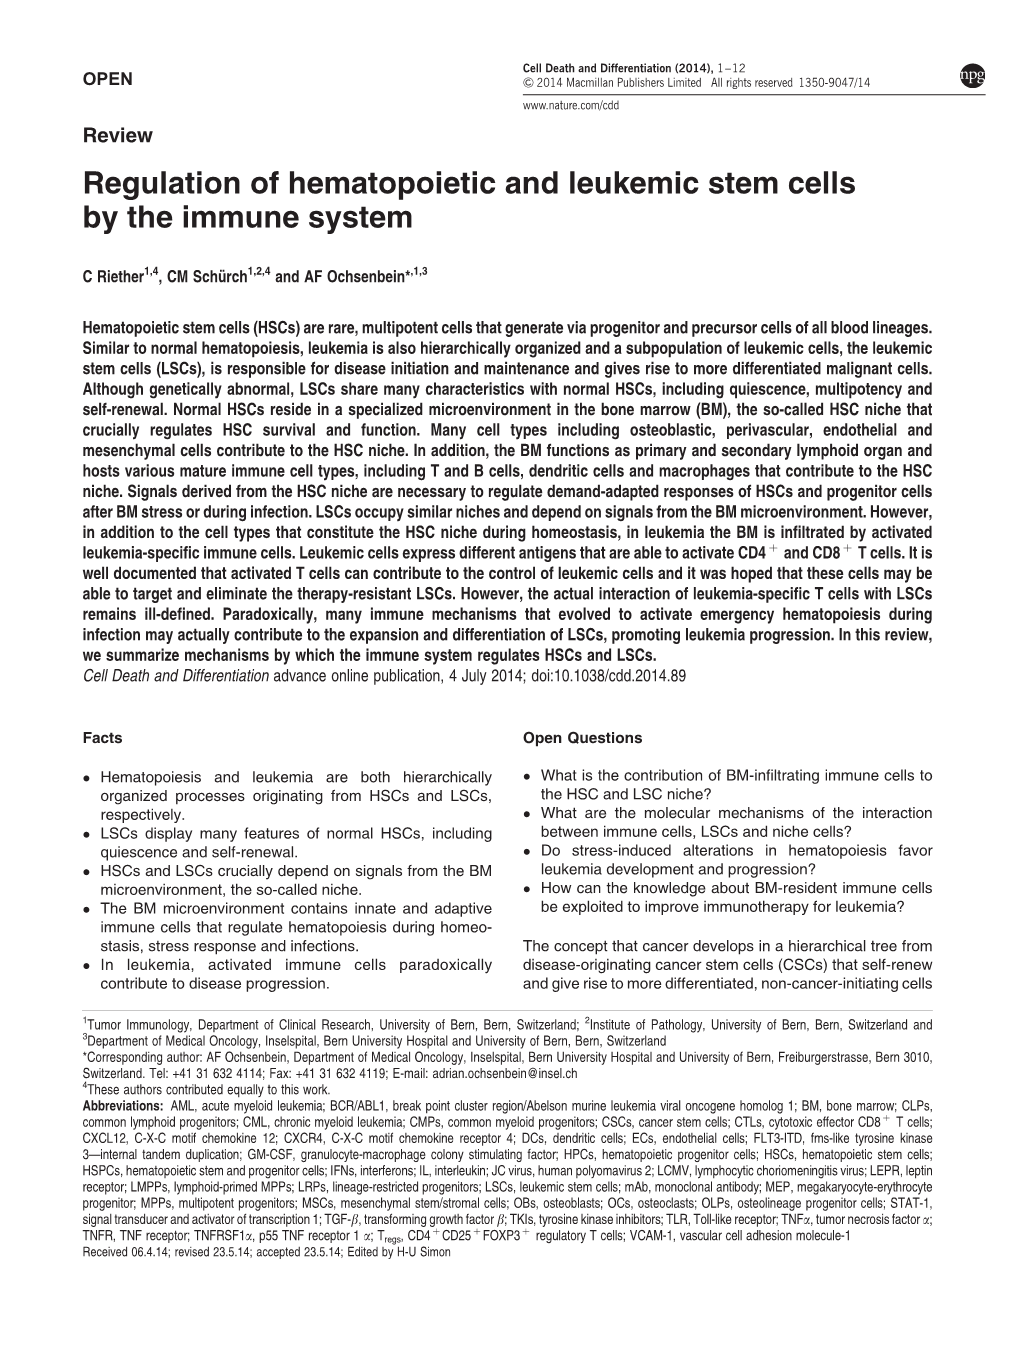 Regulation of Hematopoietic and Leukemic Stem Cells by the Immune System